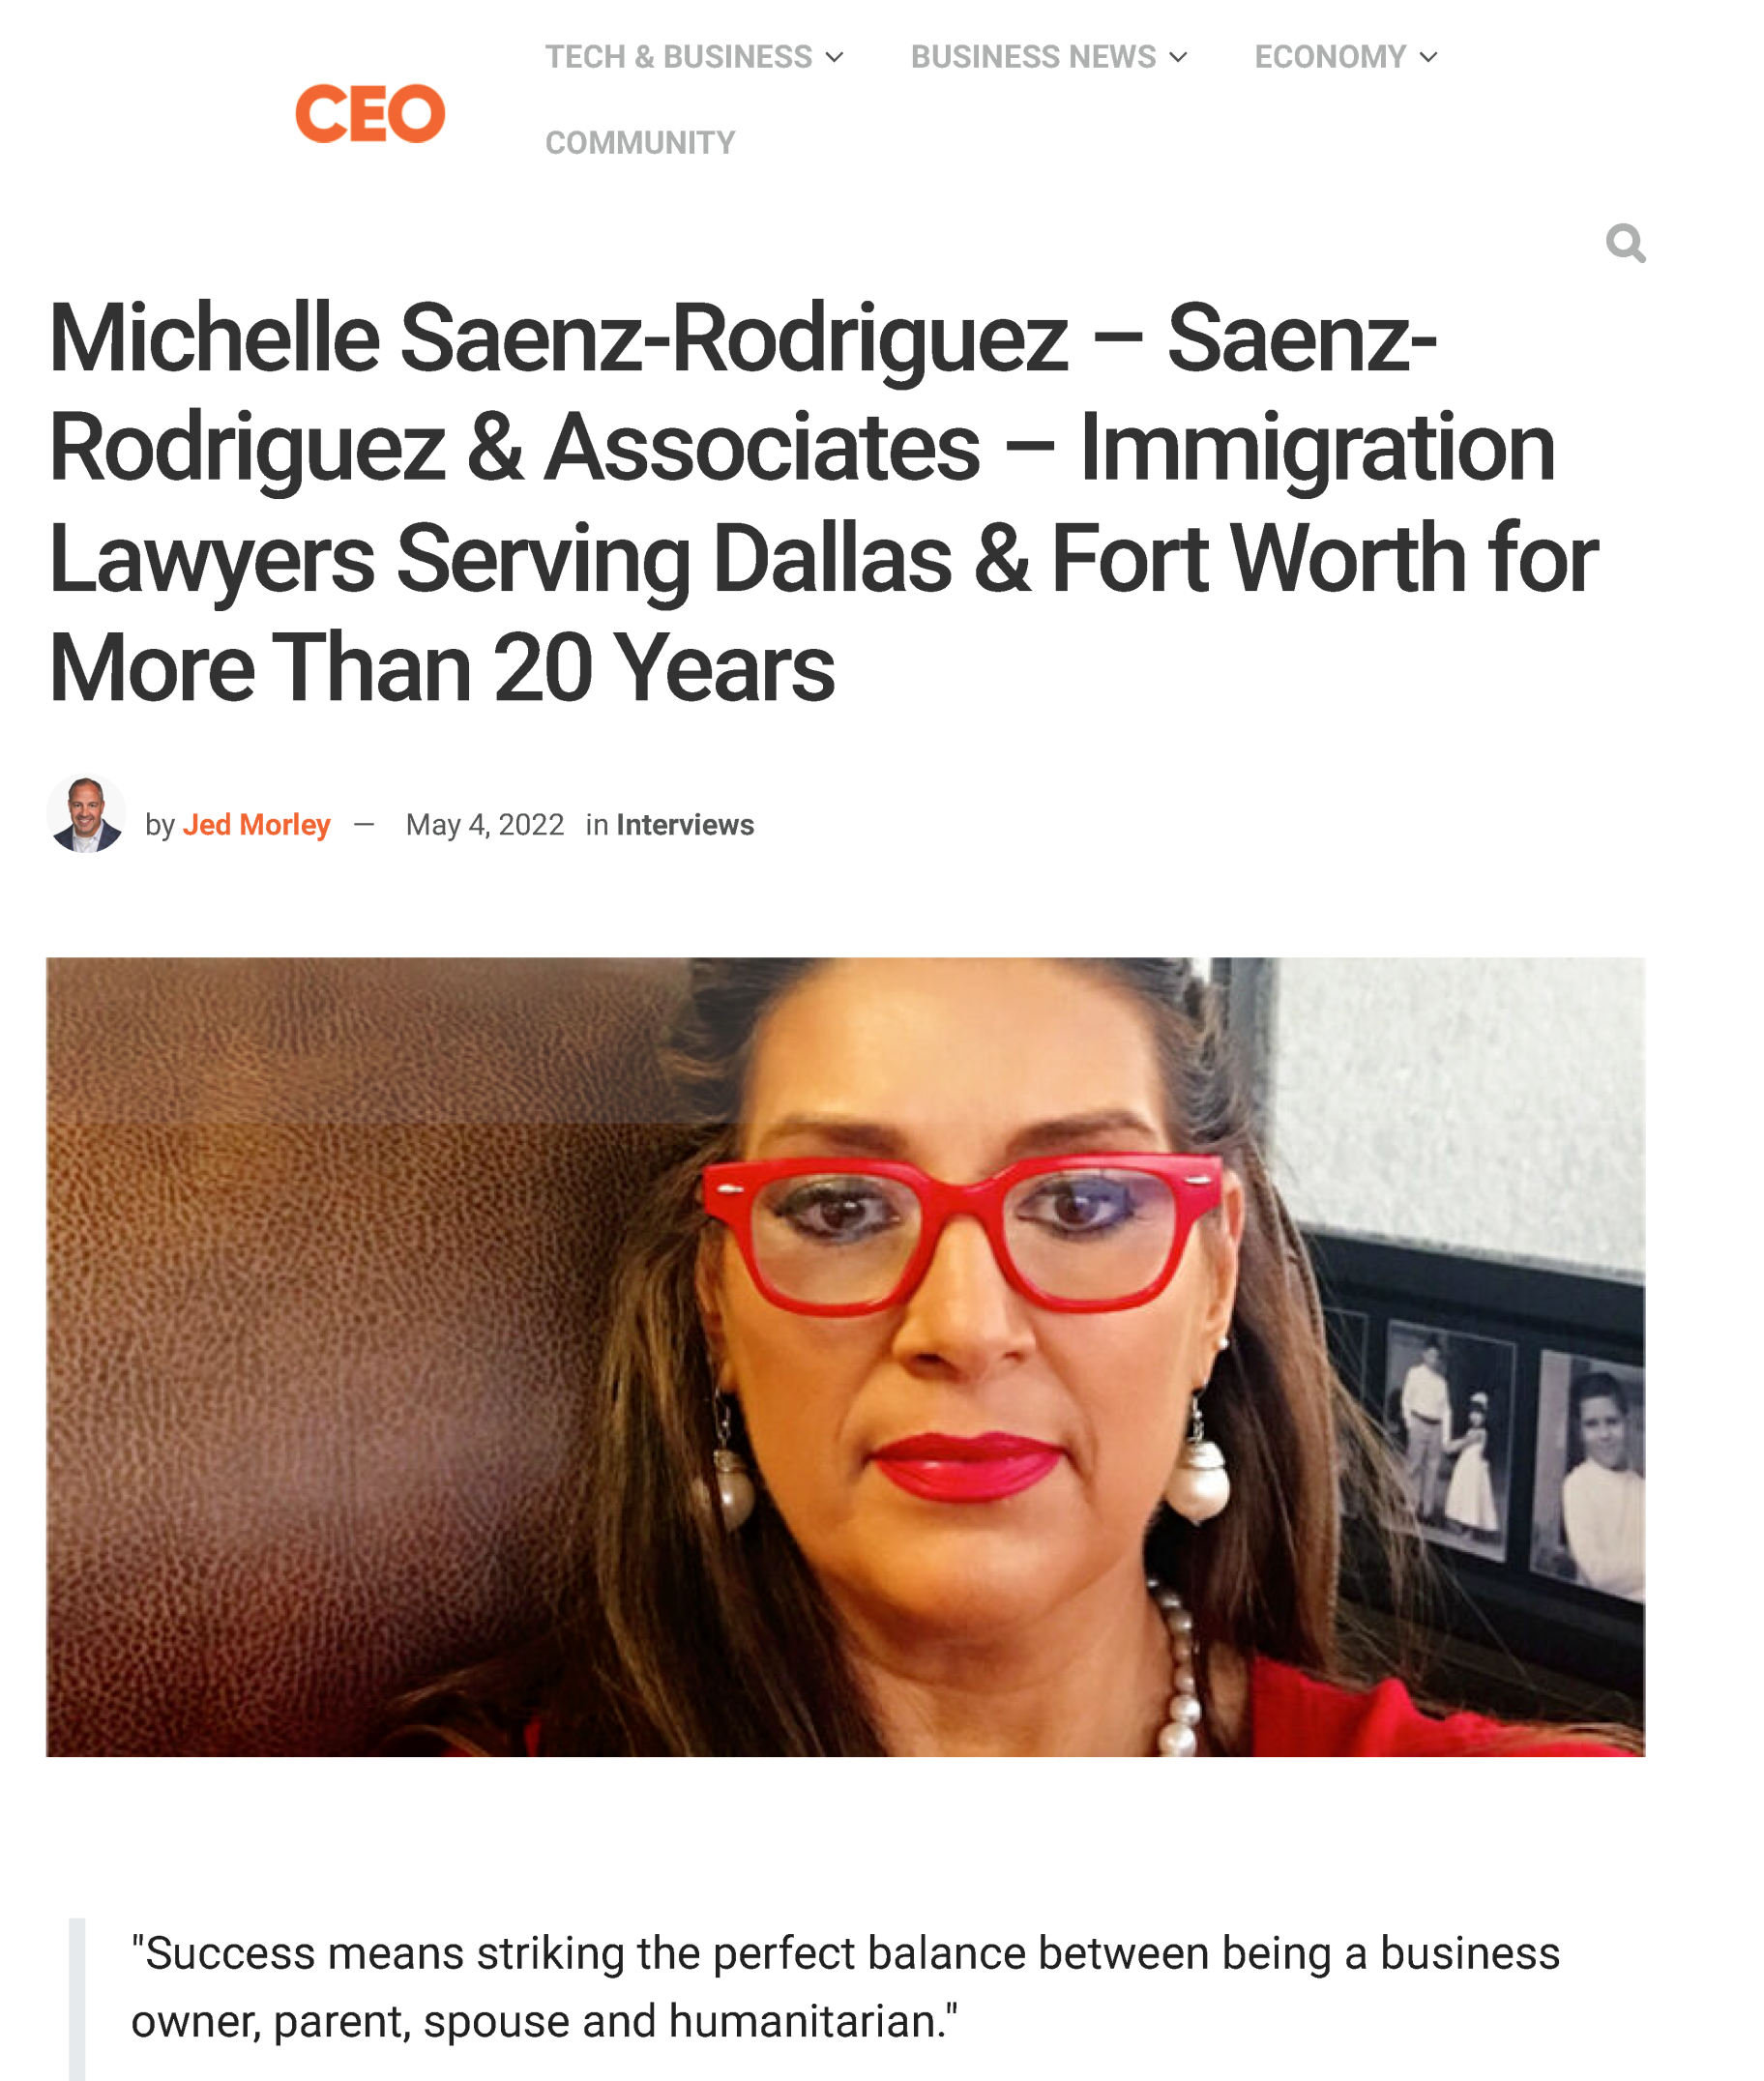 Michelle Saenz-Rodriguez – Saenz-Rodriguez & Associates – Immigration Lawyers Serving Dallas & Fort Worth for More Than 20 Years